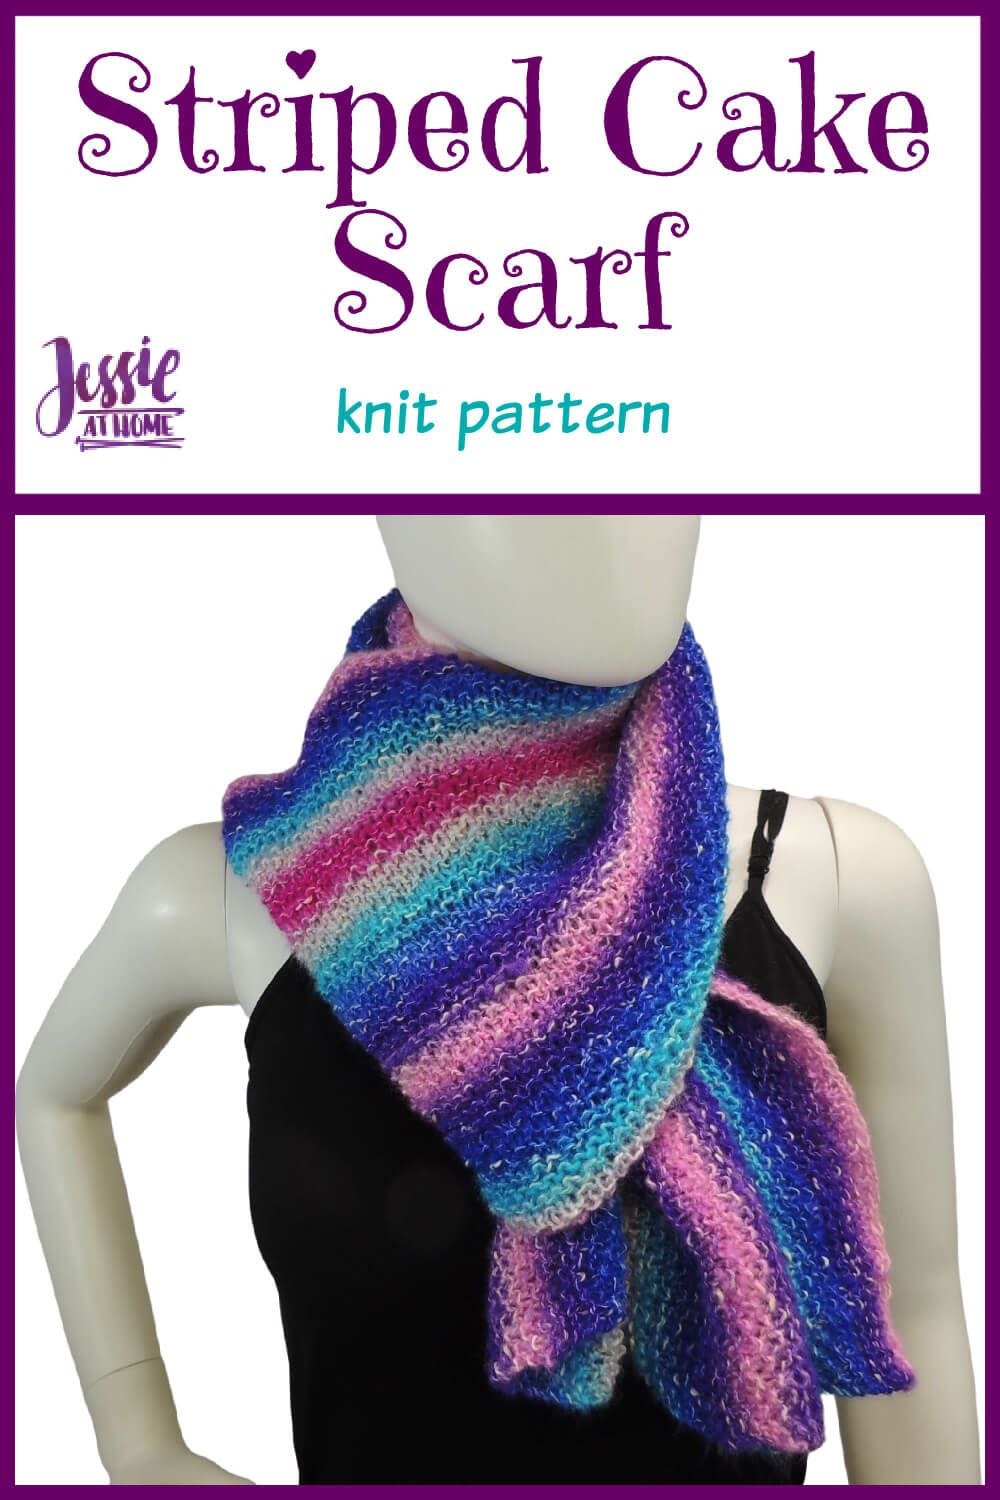 Striped Cake Scarf knit pattern by Jessie At Home - Pin 1